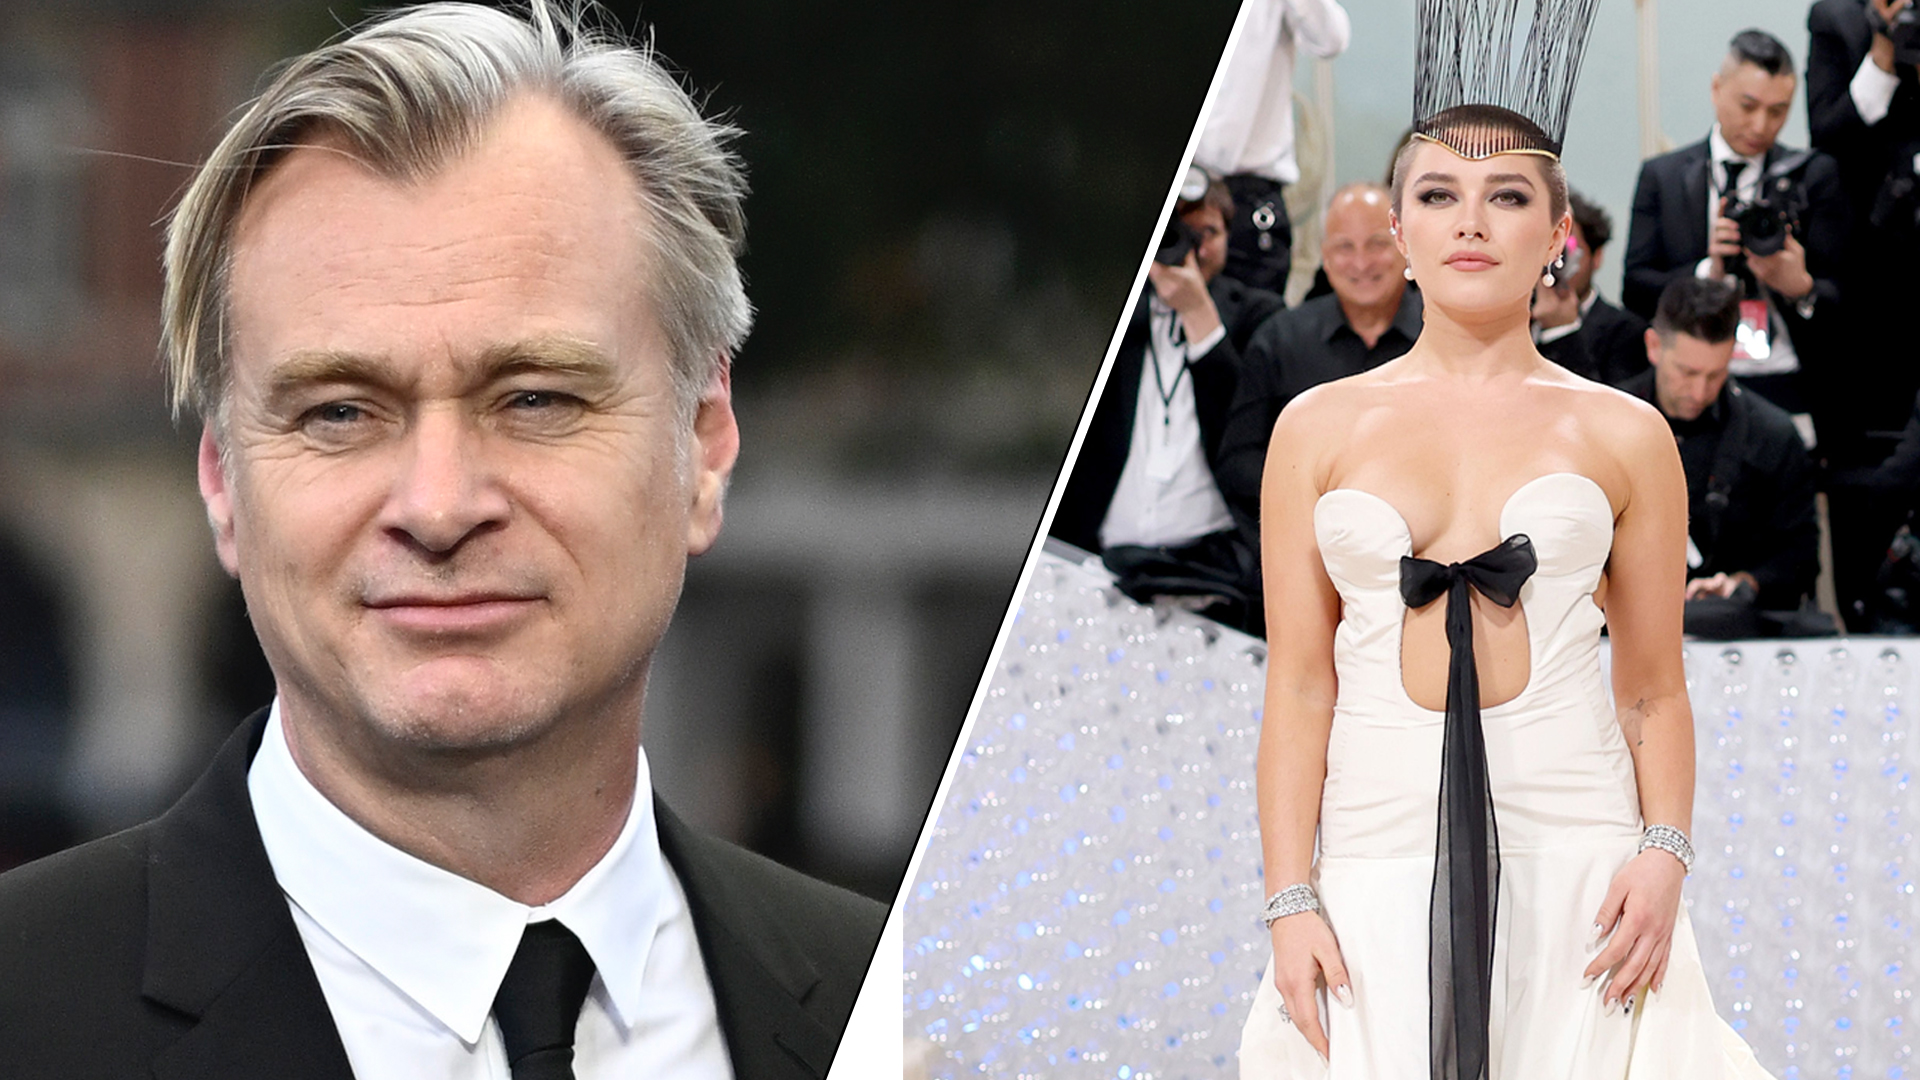 Why did Christopher Nolan Apologize to Florence Pugh?